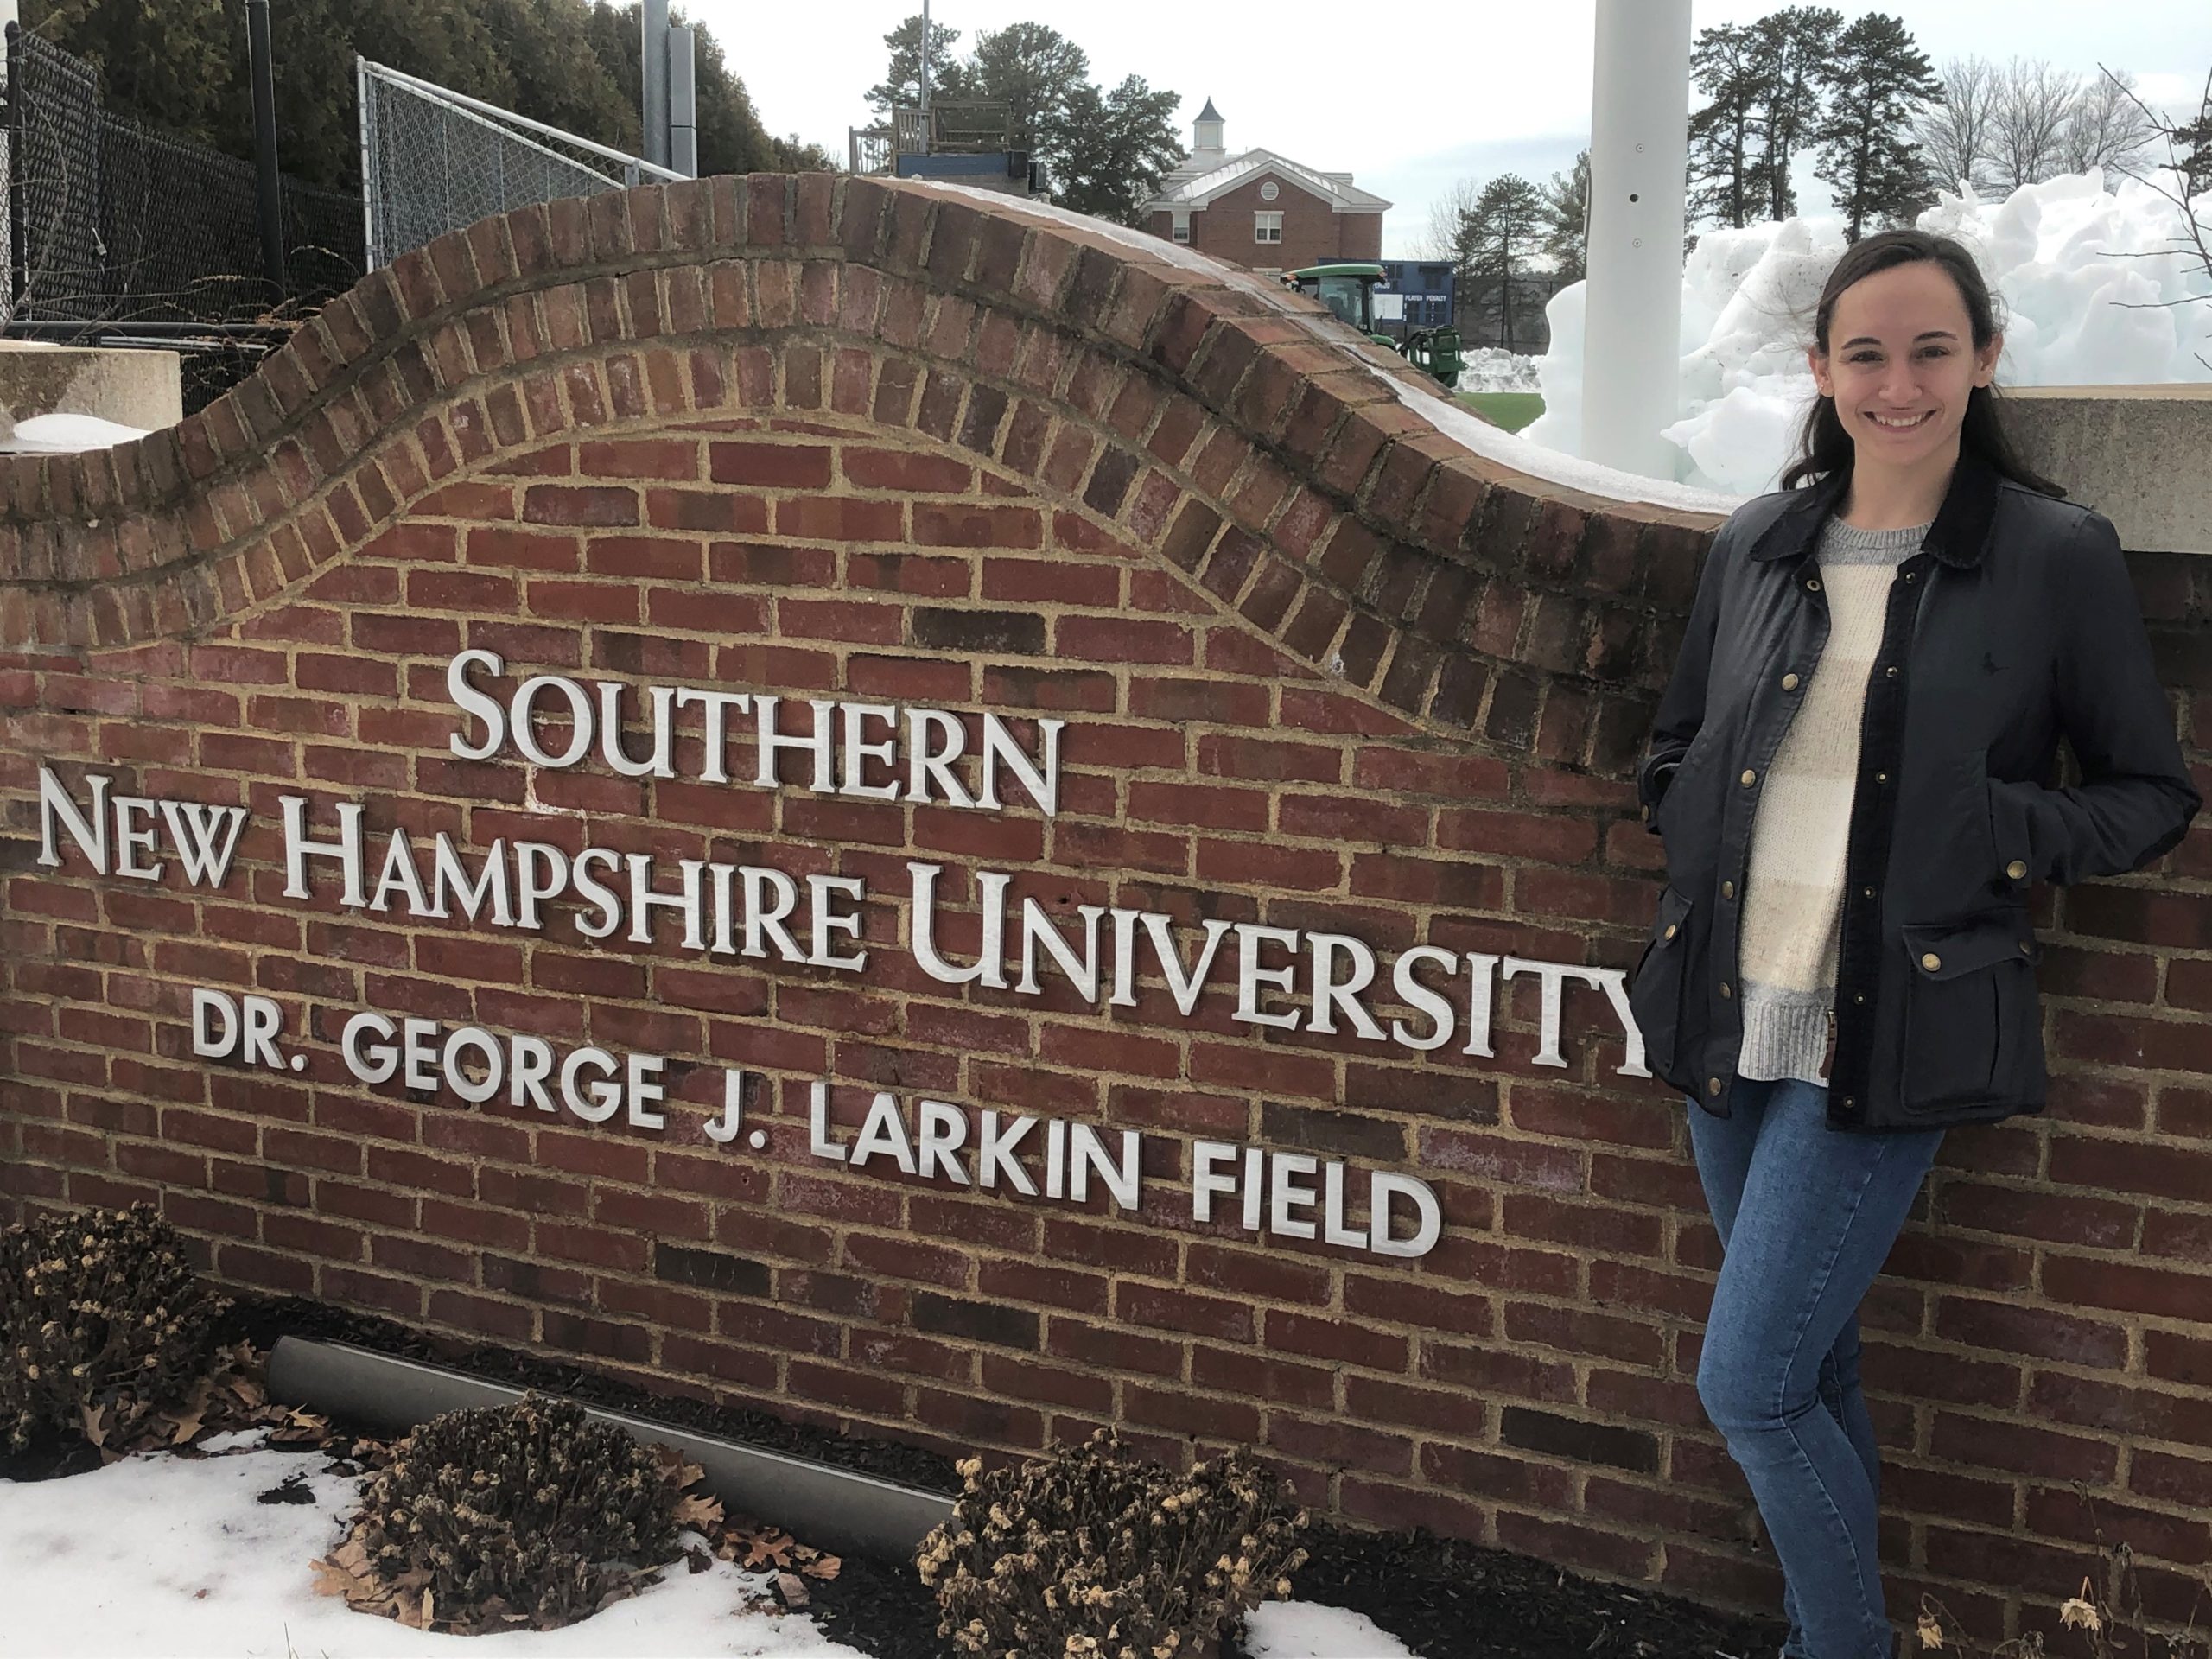 Company Dancer Cara Shipman standing next to outdoor sign reading "Southern New Hampshire University"